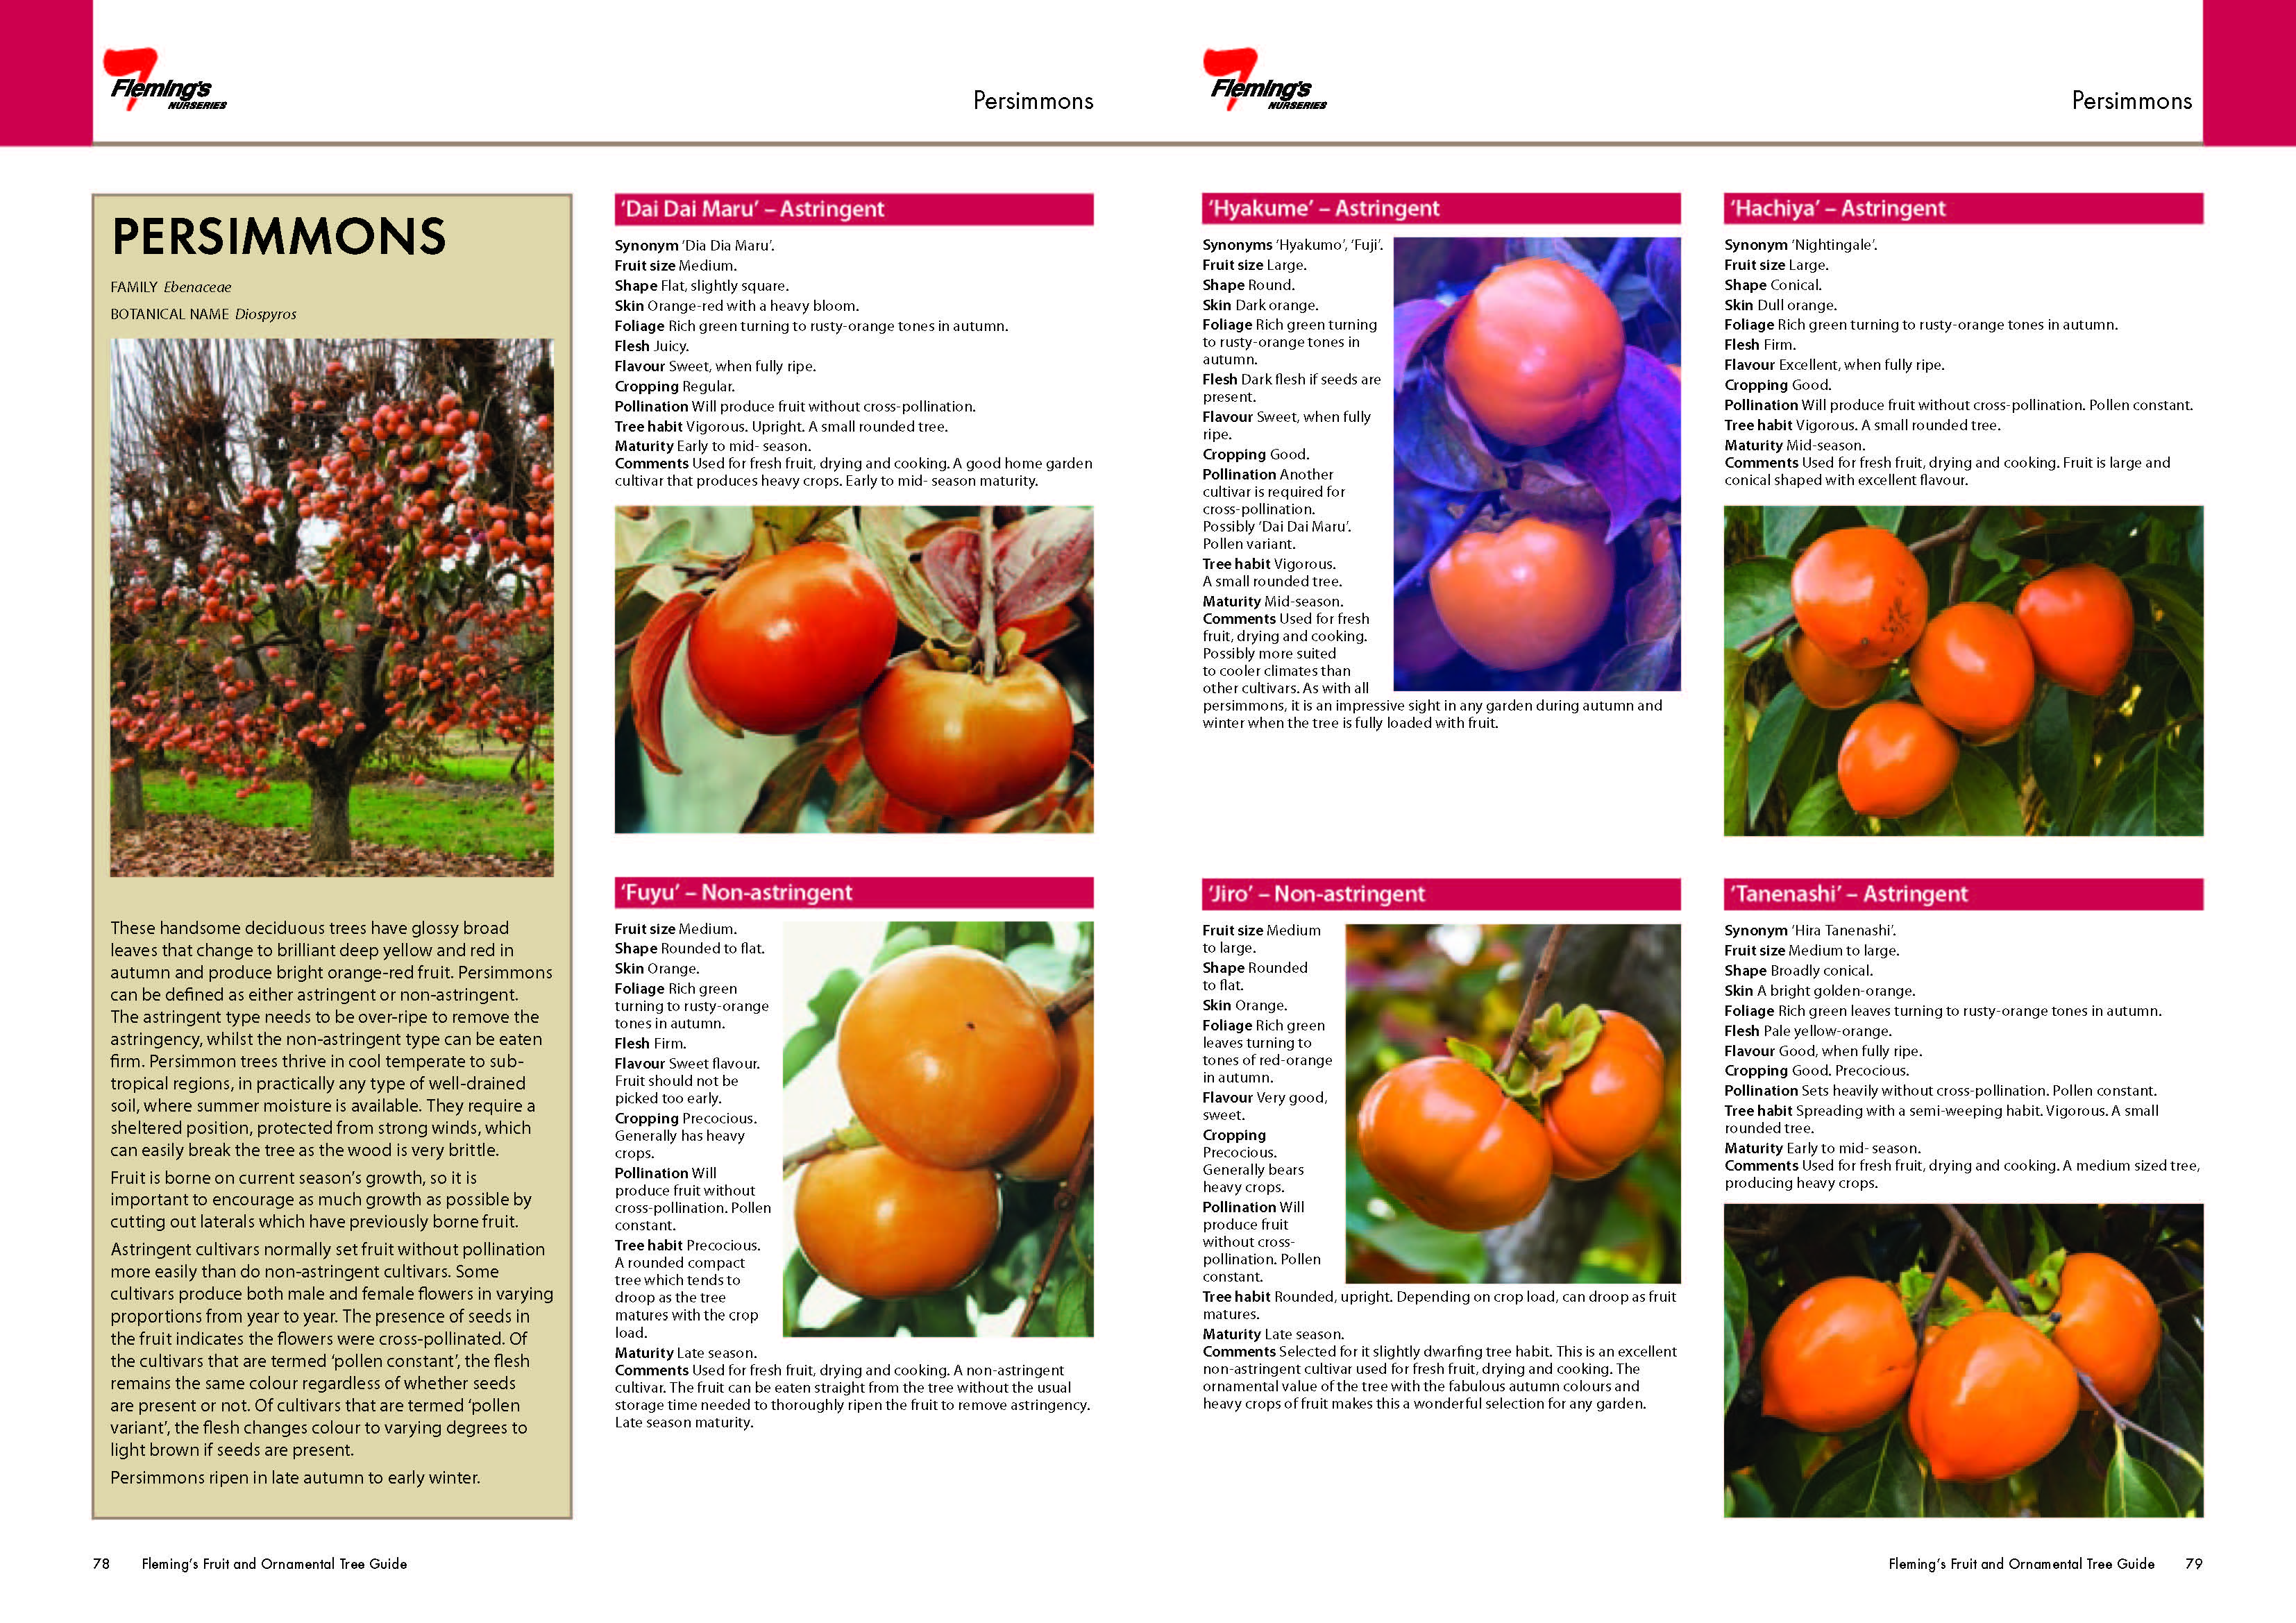 Persimmon Images used in Flemming's Nurseries Publication - Australia